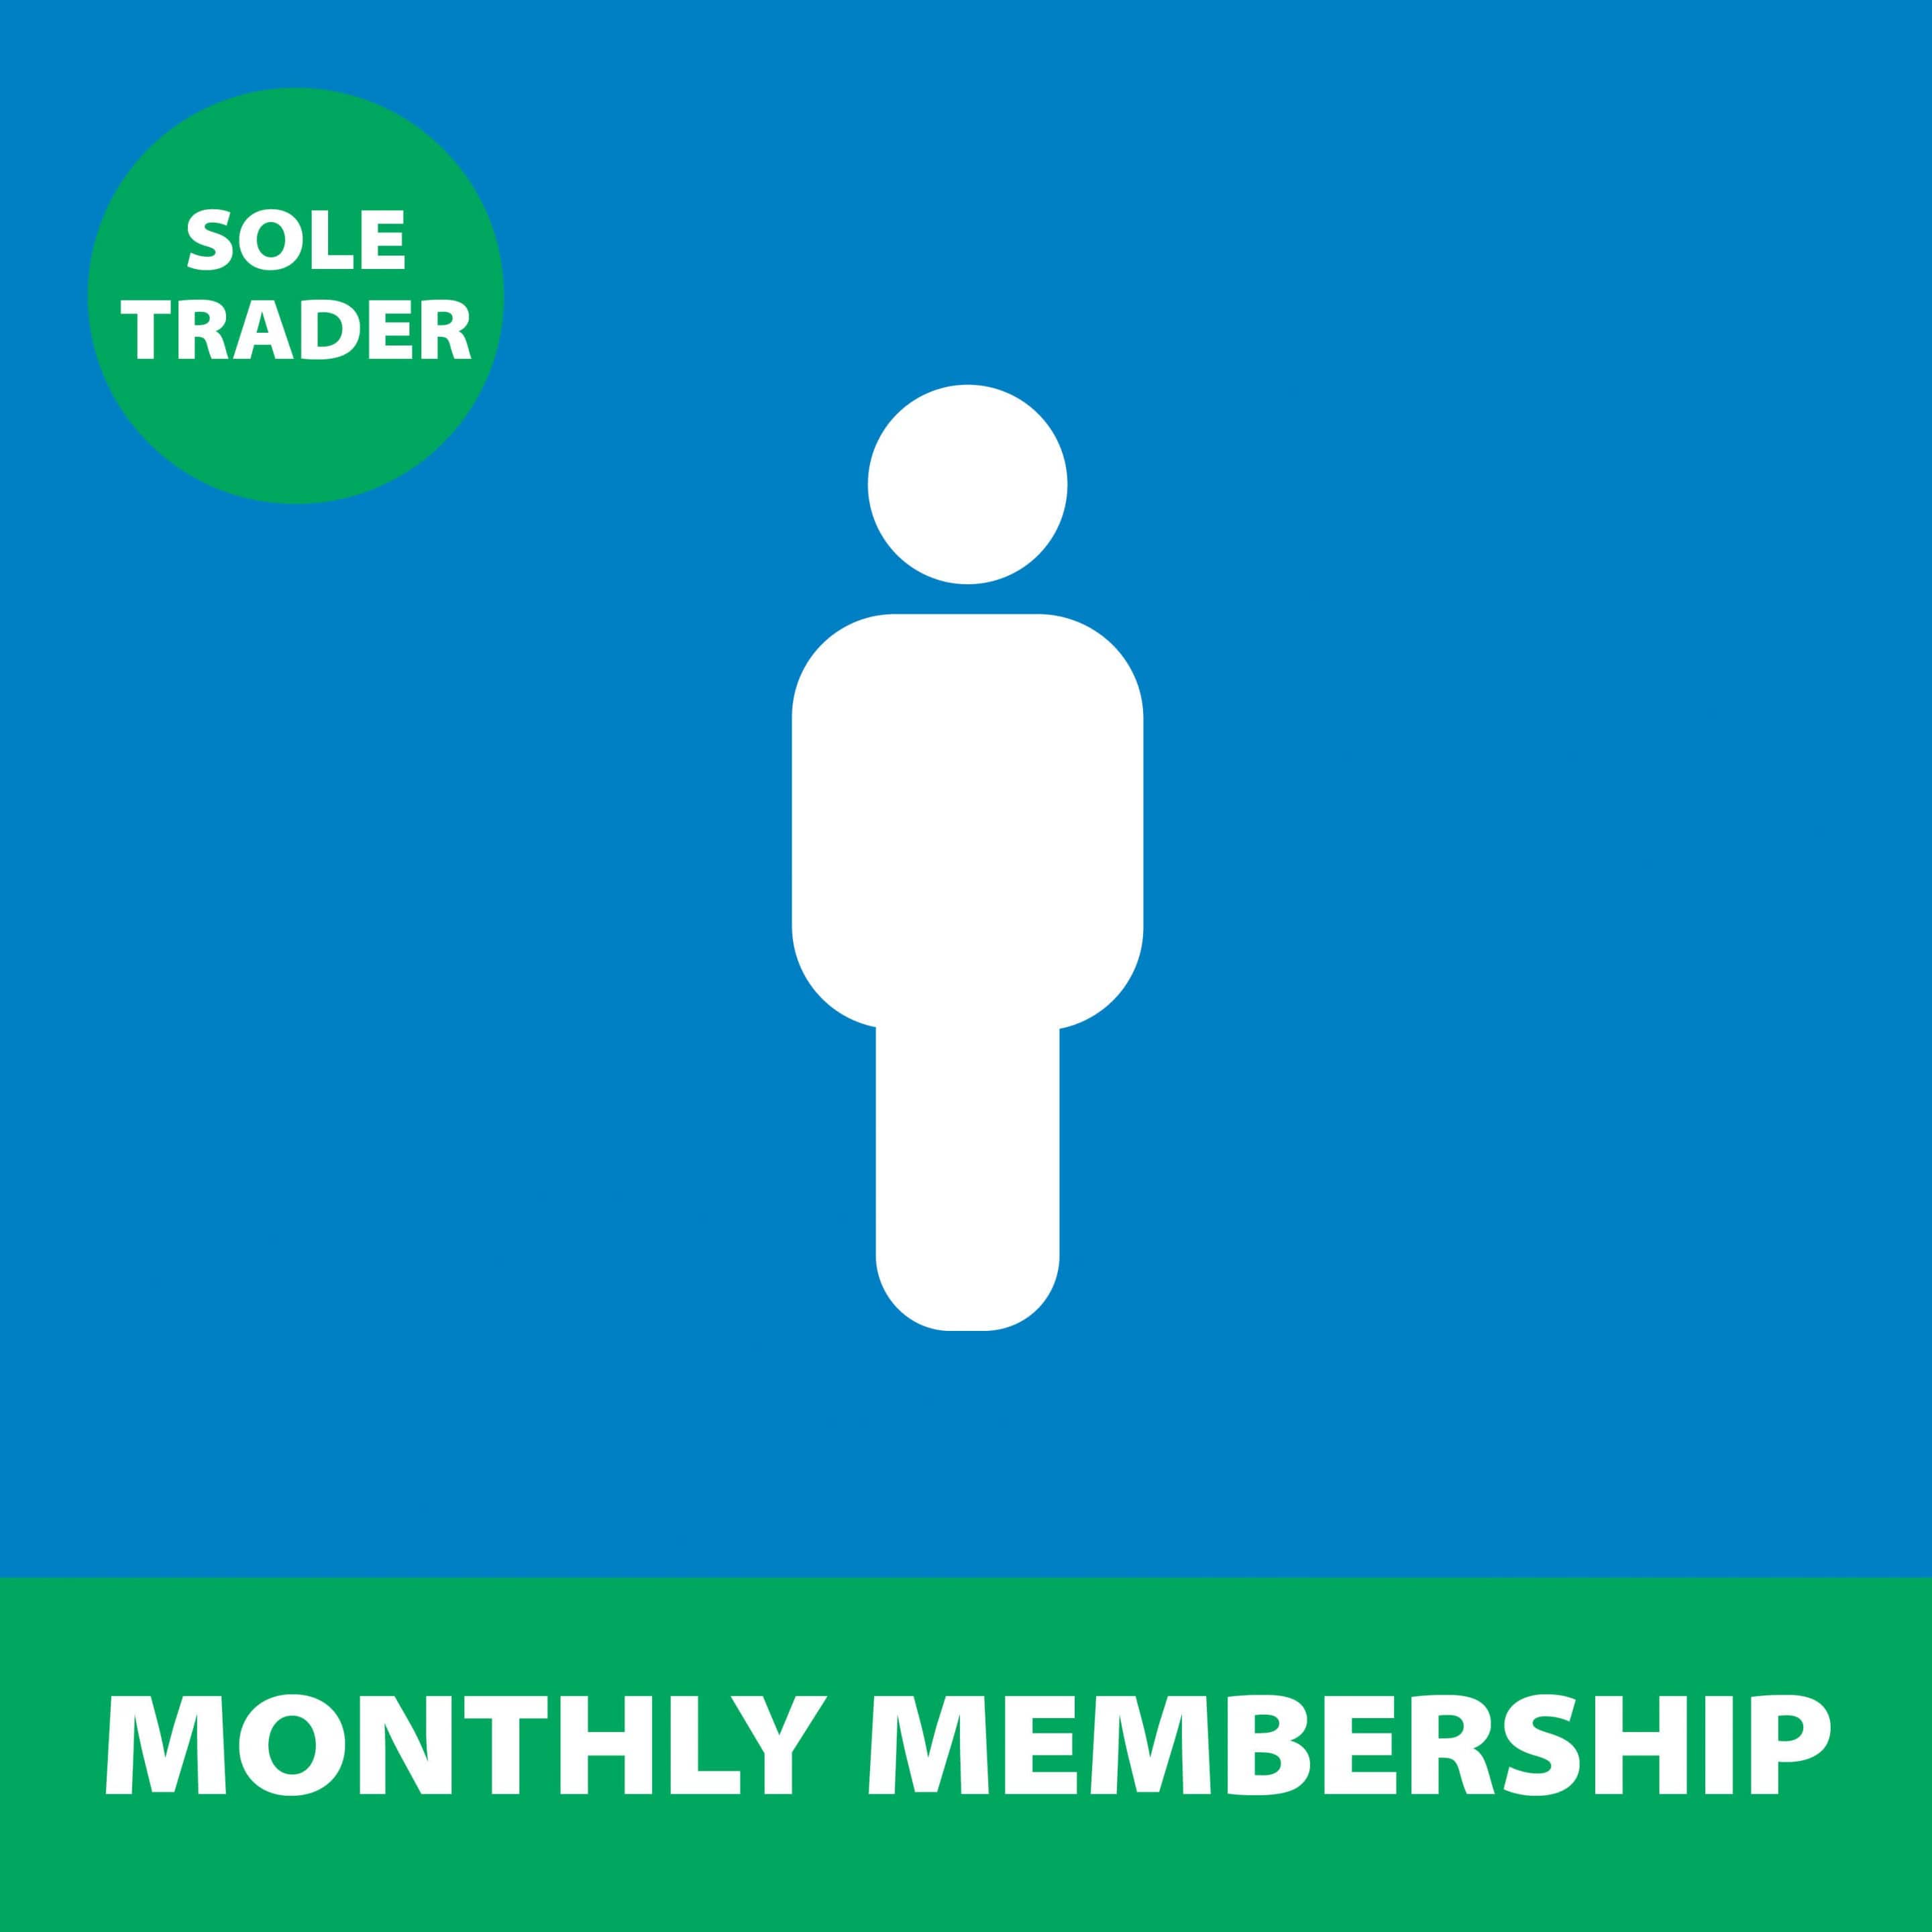 Membership (Sole Trader – Monthly)